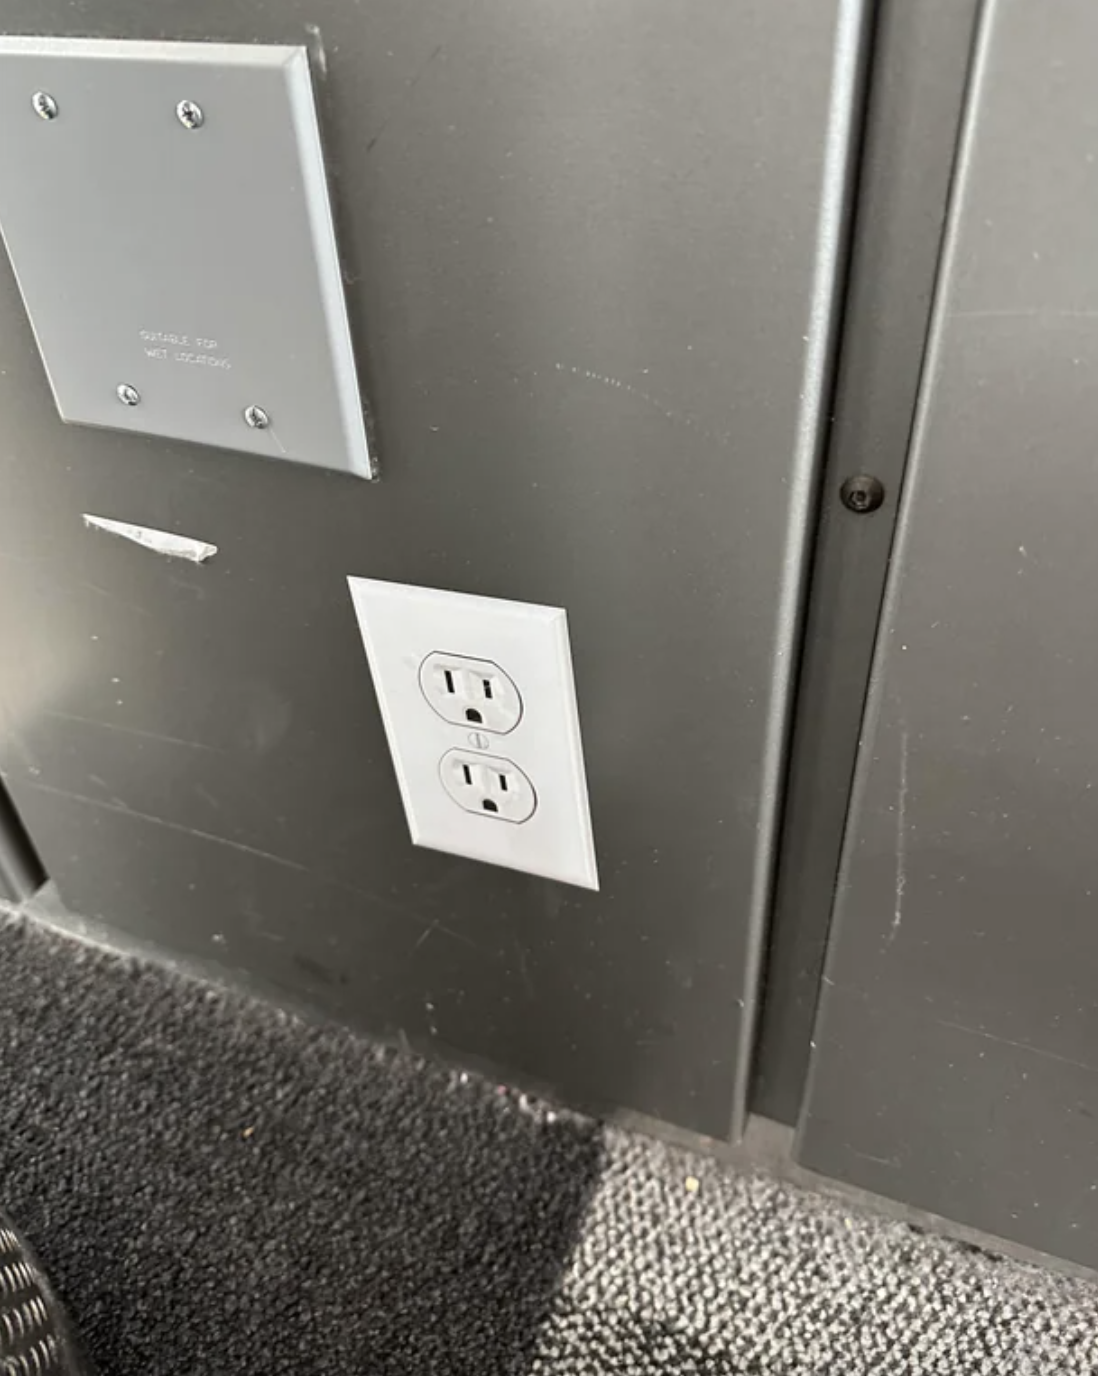 A wall outlet